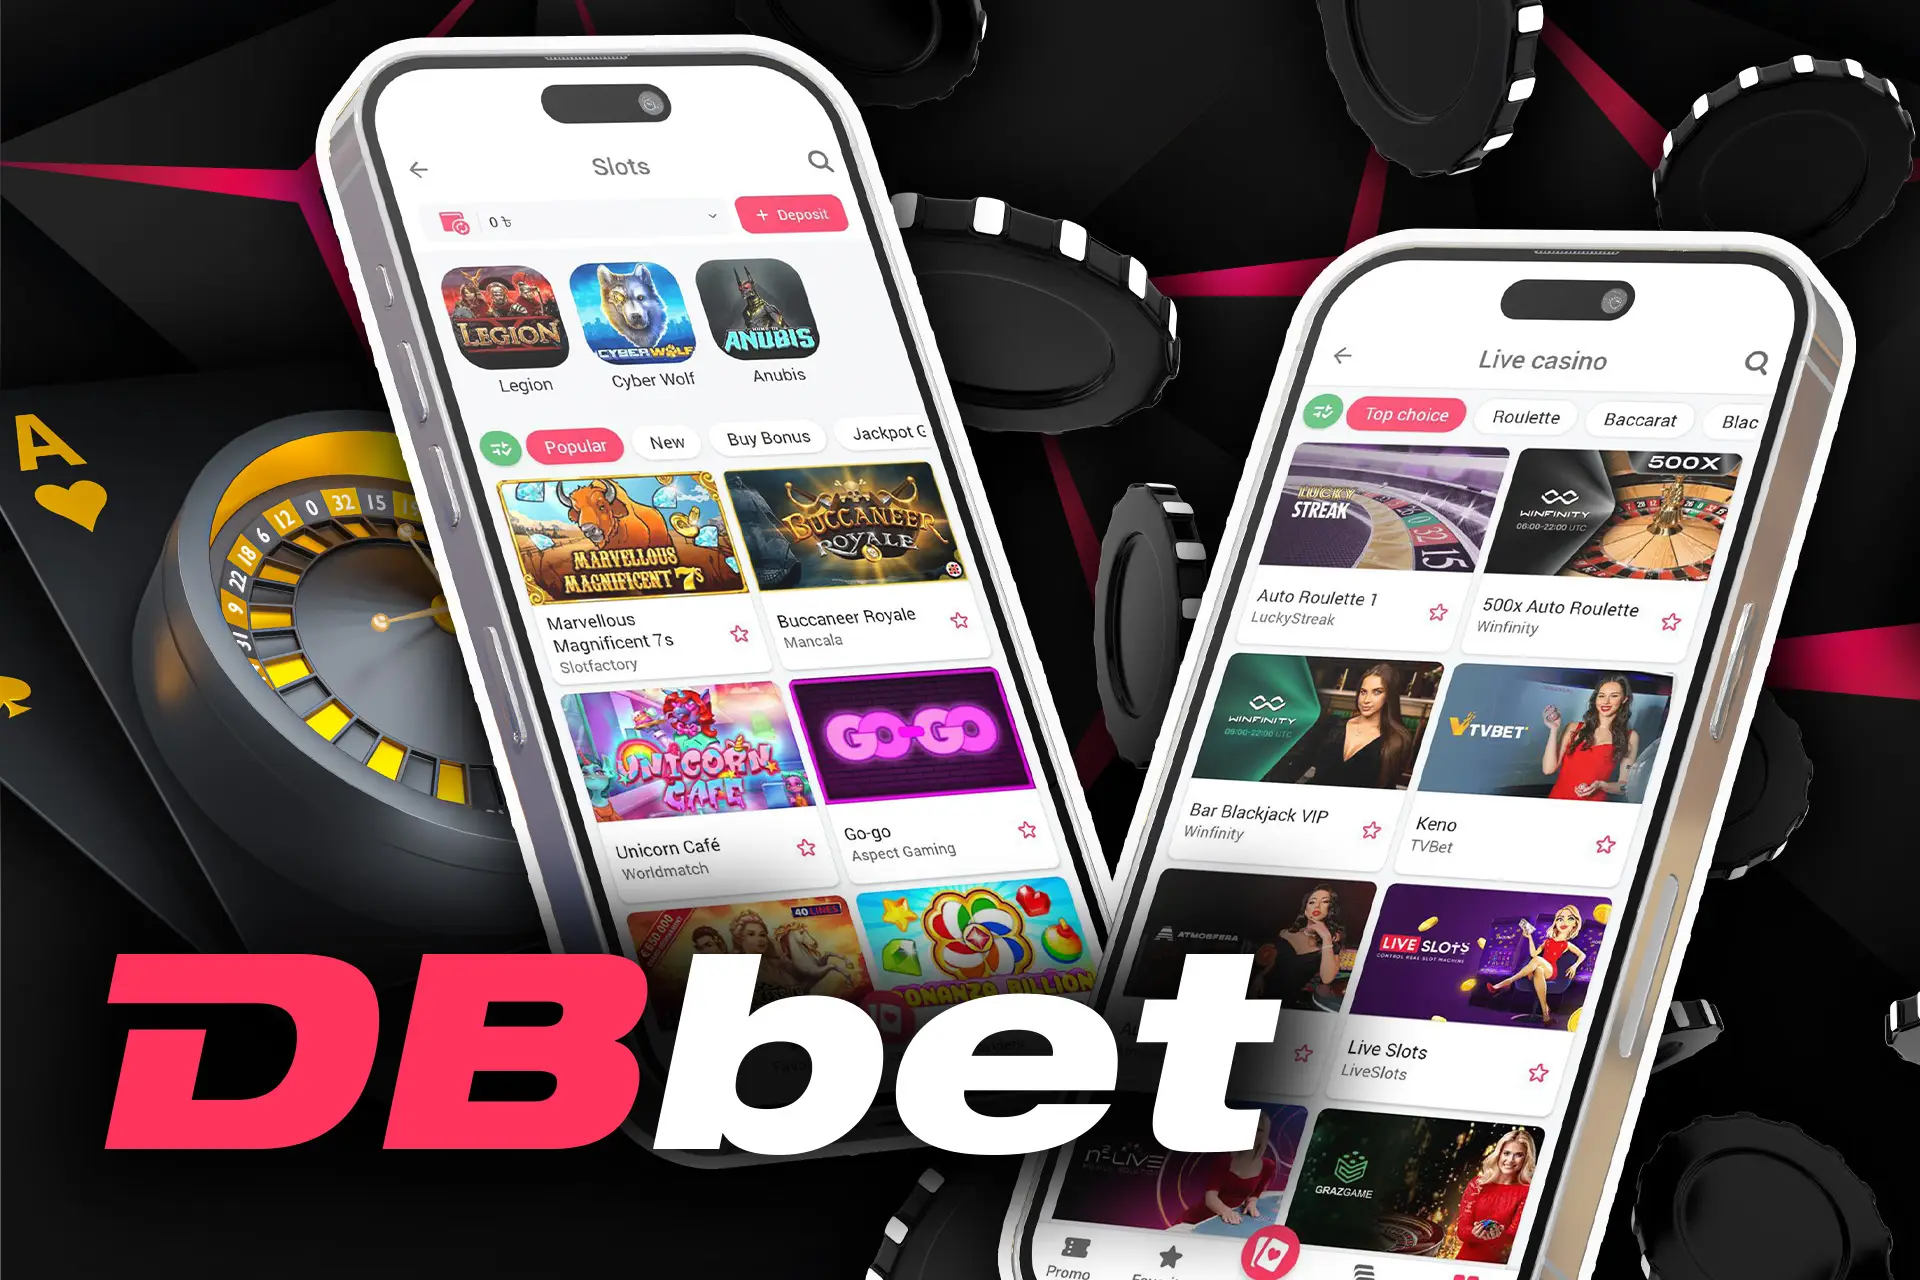 In the DBbet app, play a variety of casino games.